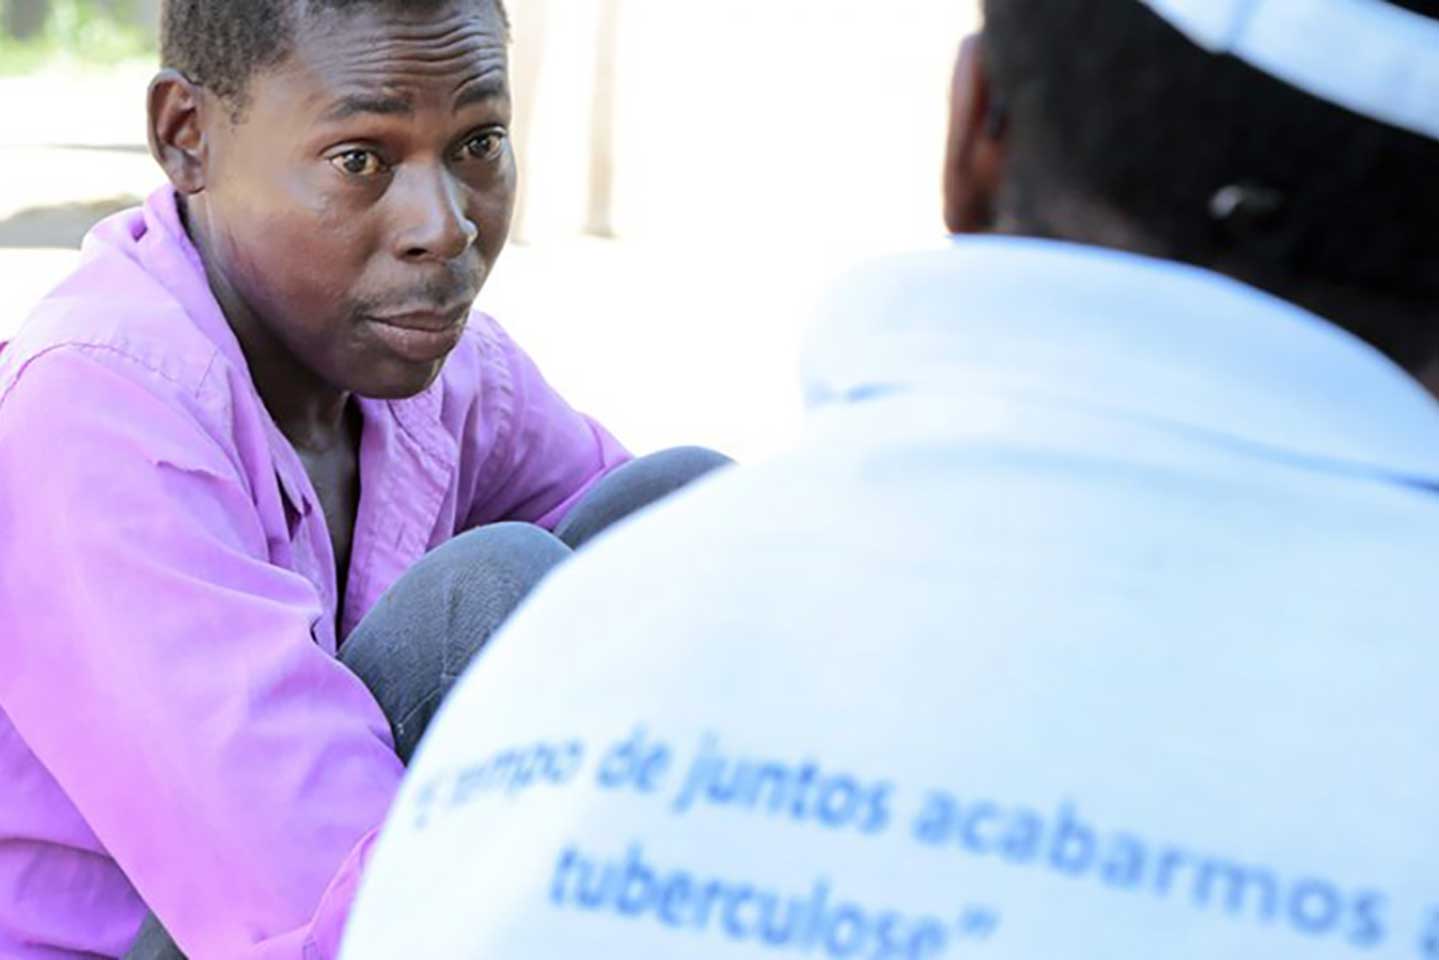 14,000 people receive information on TB